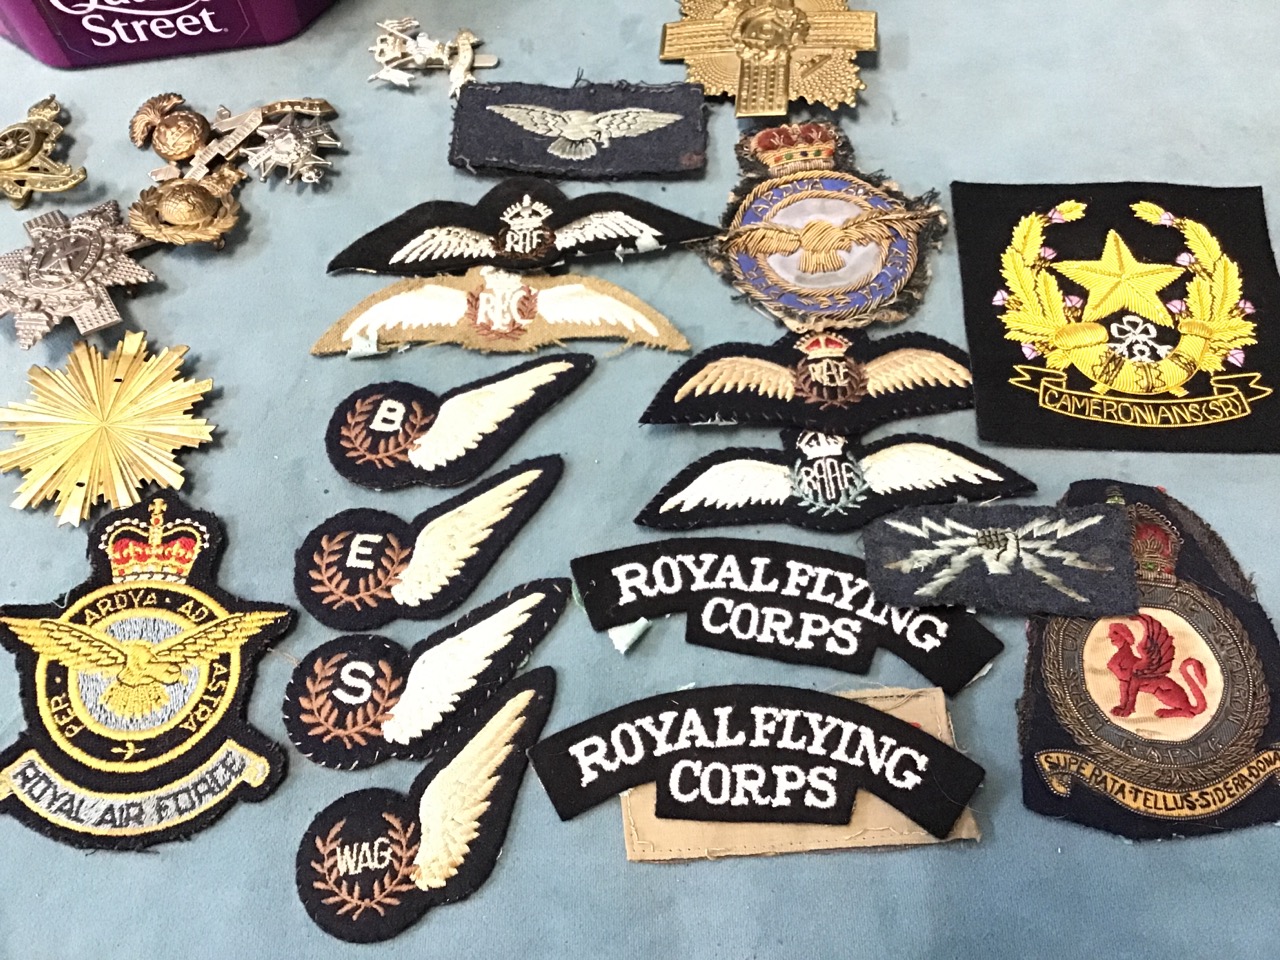 Miscellaneous mainly British militaria - cap badges, embroidered insignia, buttons, numerous - Image 3 of 3